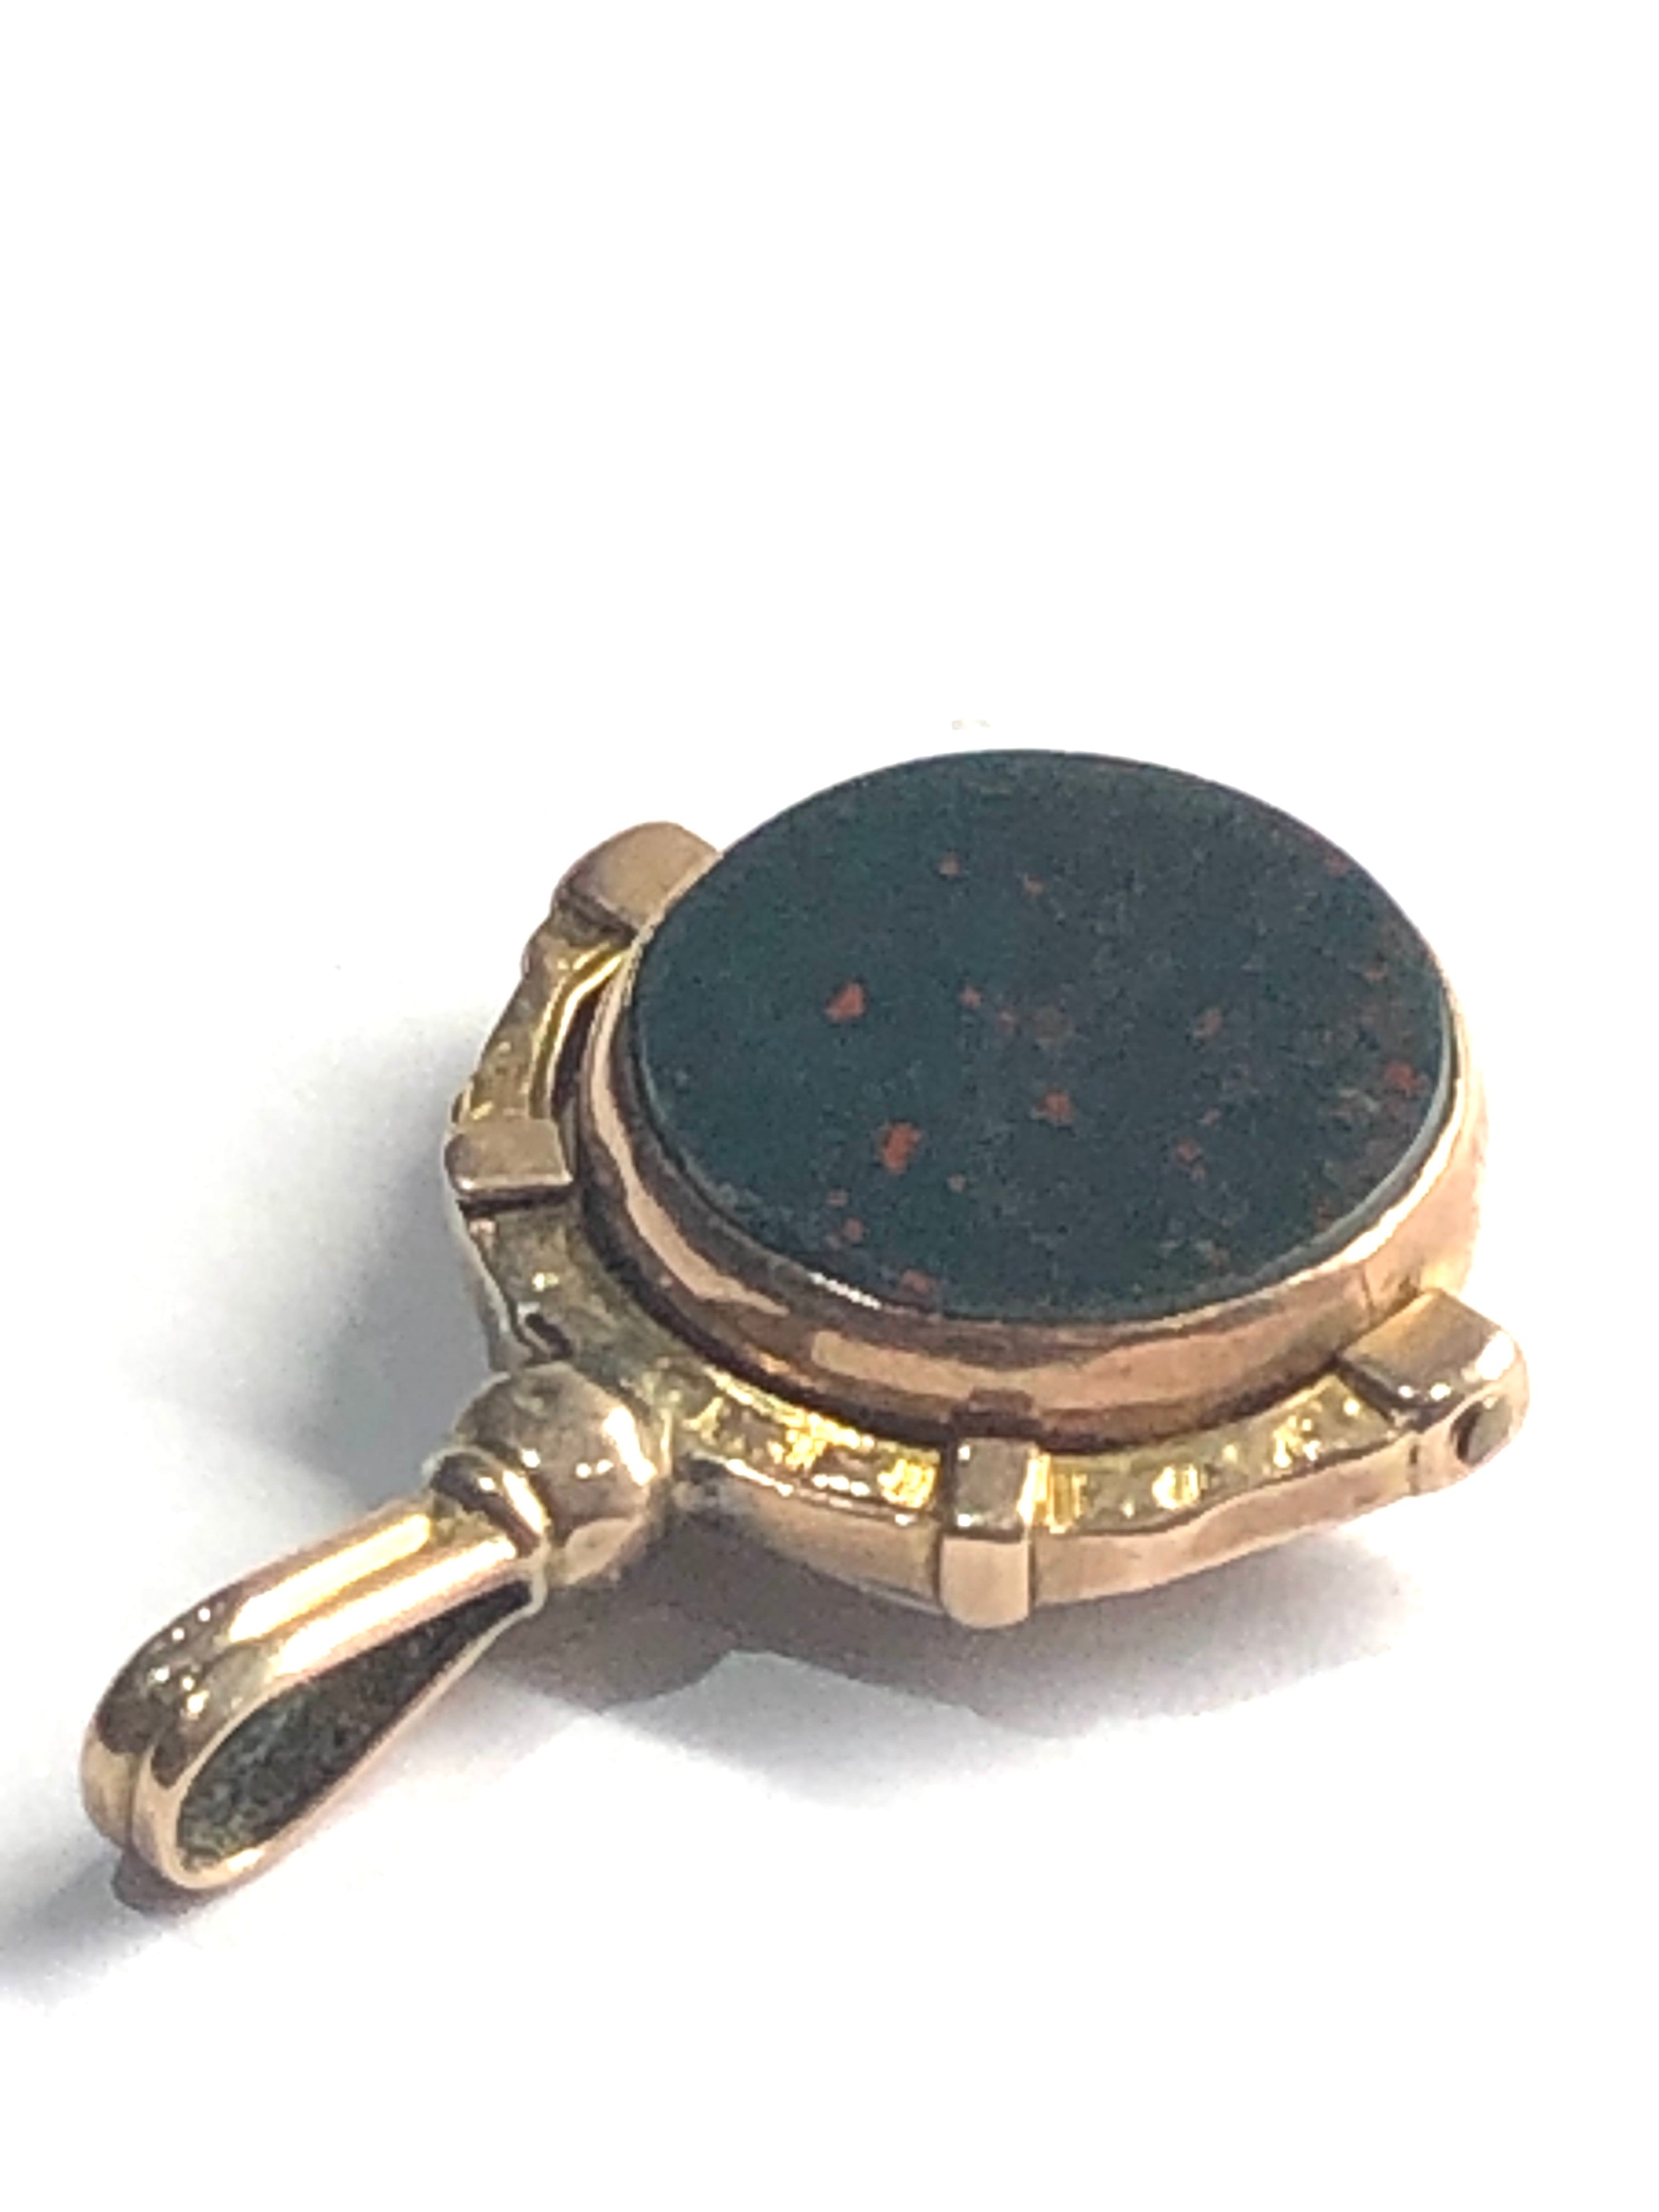 Antique 9ct gold agate swivel fob 6.2g